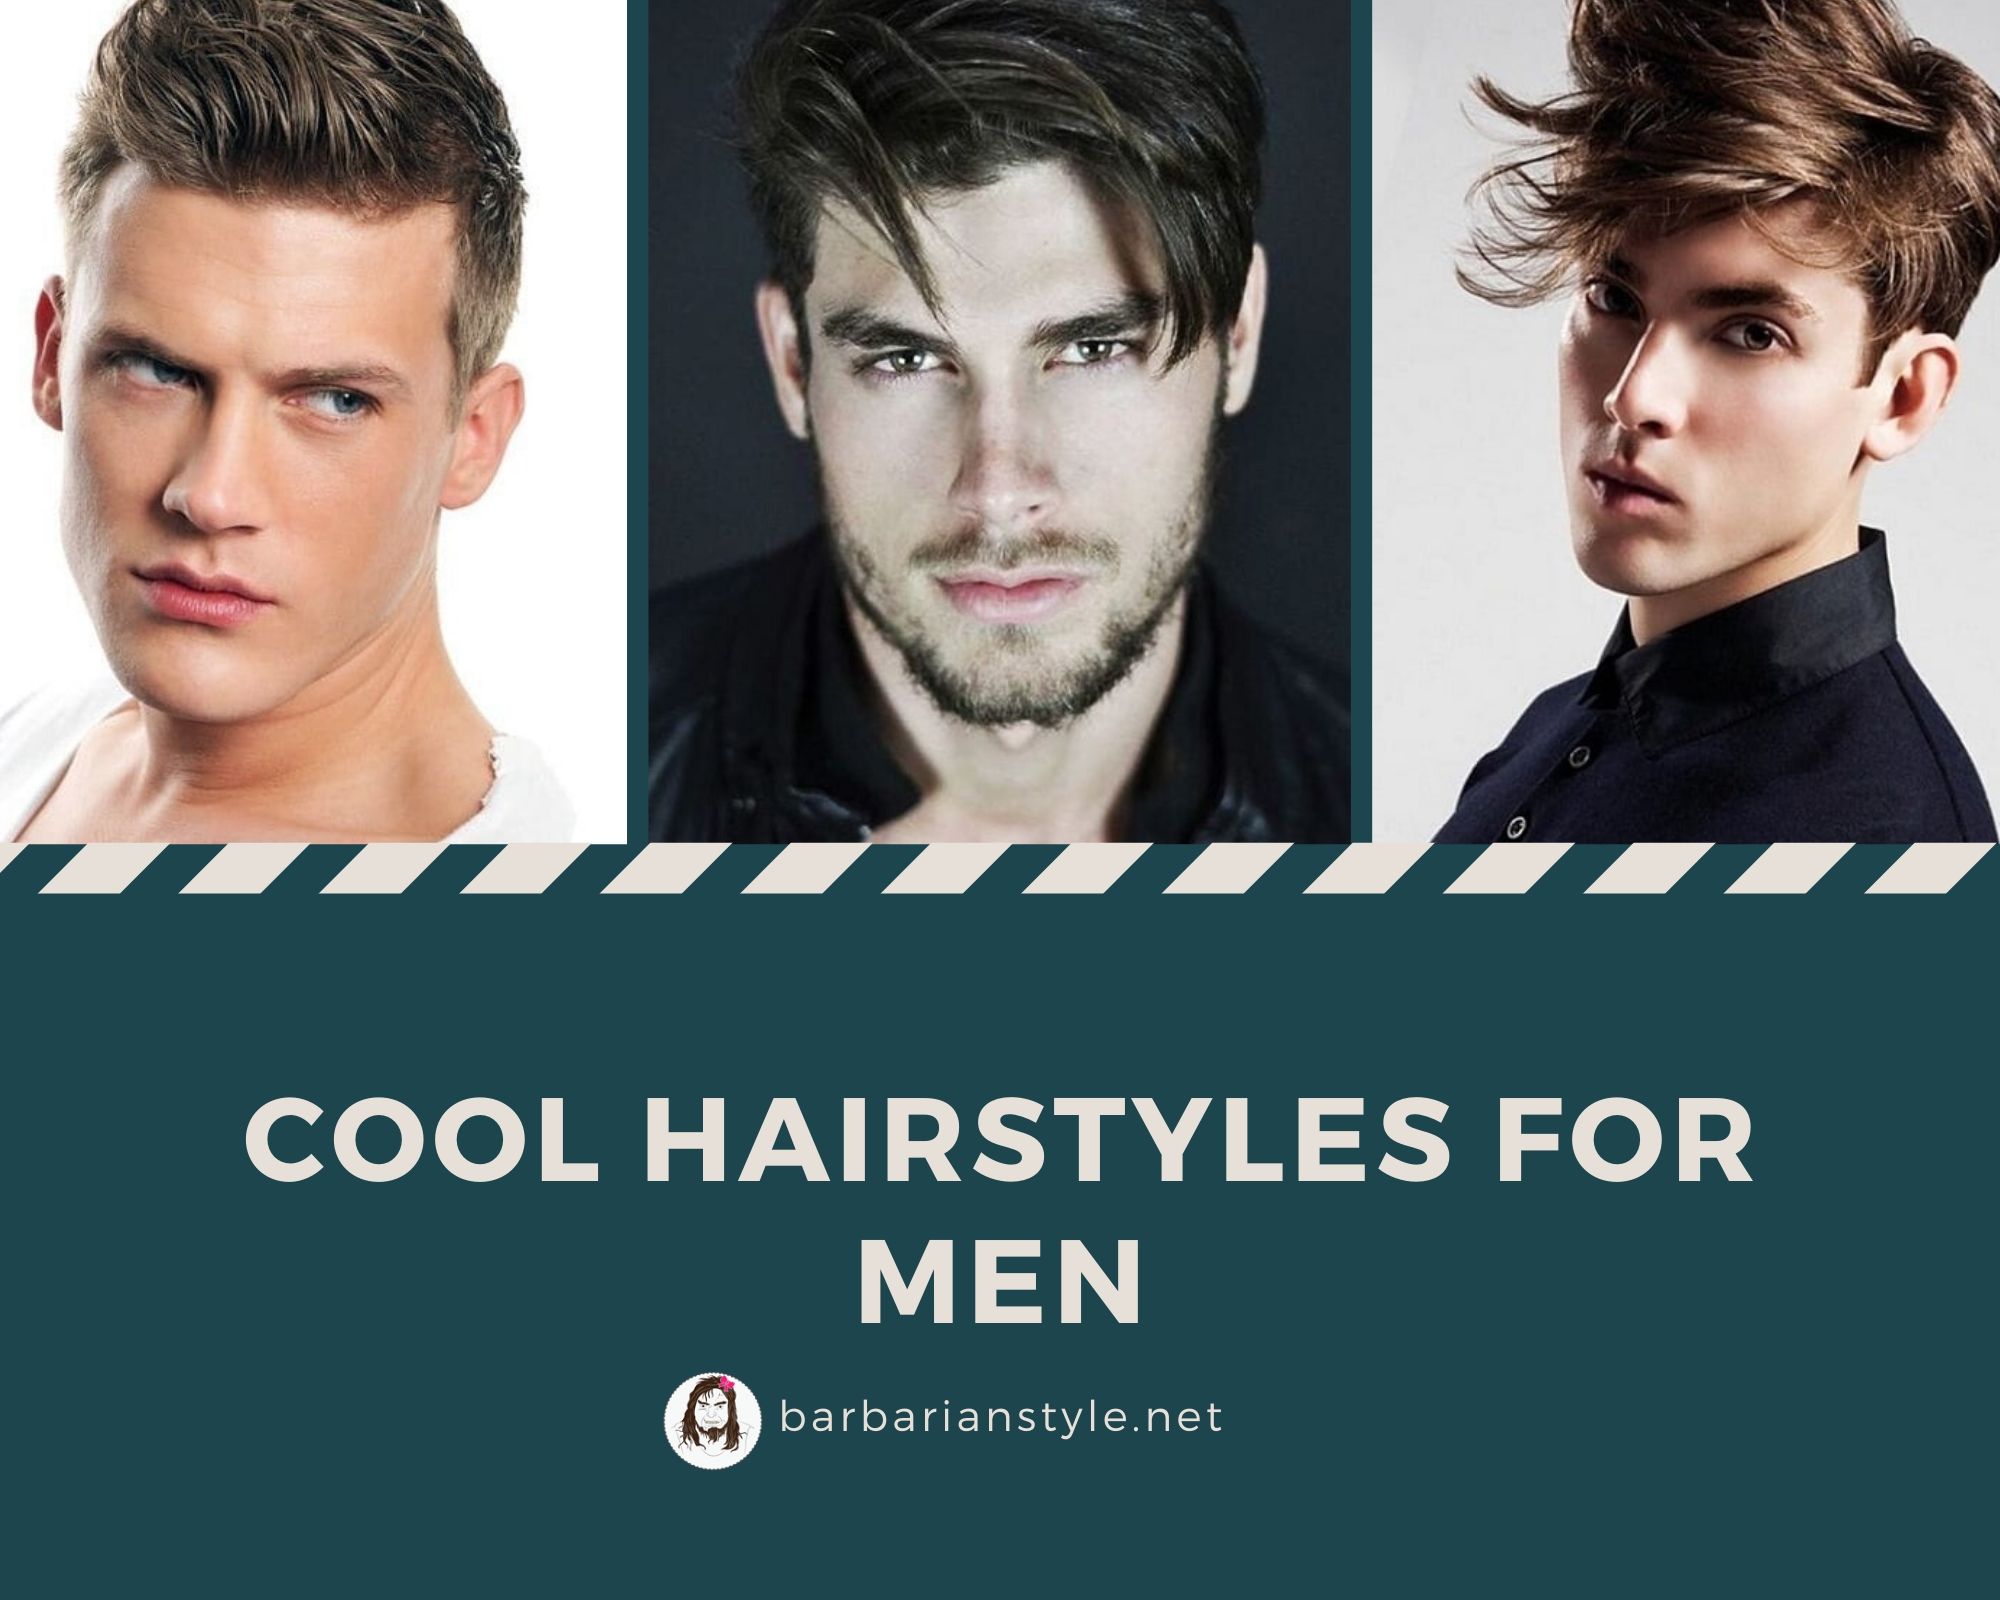 Tips For Cool Hairstyles For Men